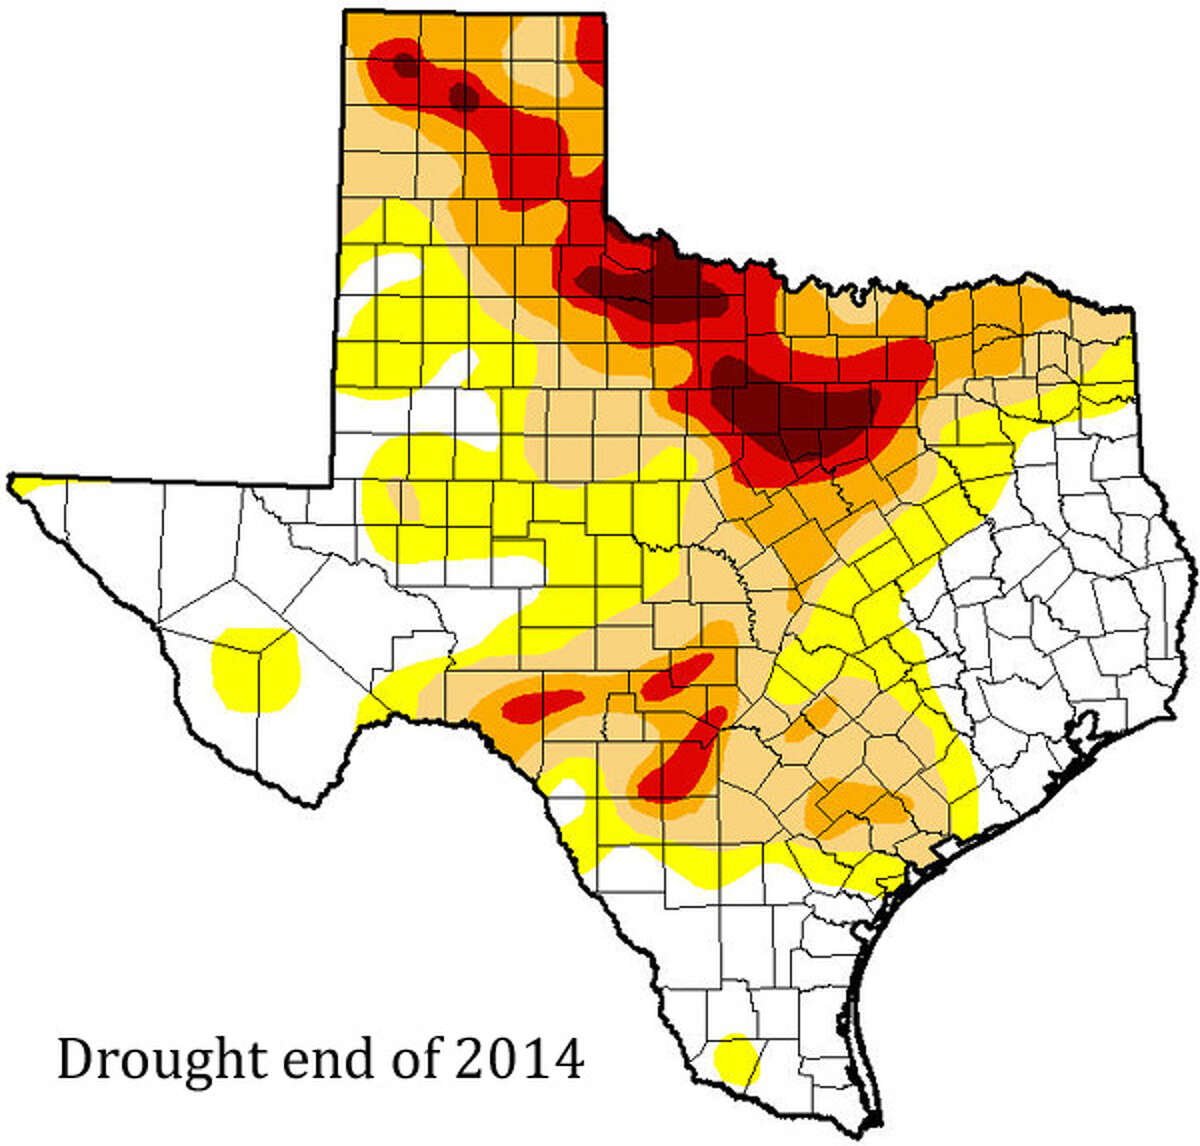 Historic Texas drought over Zero Texans impacted by drought conditions